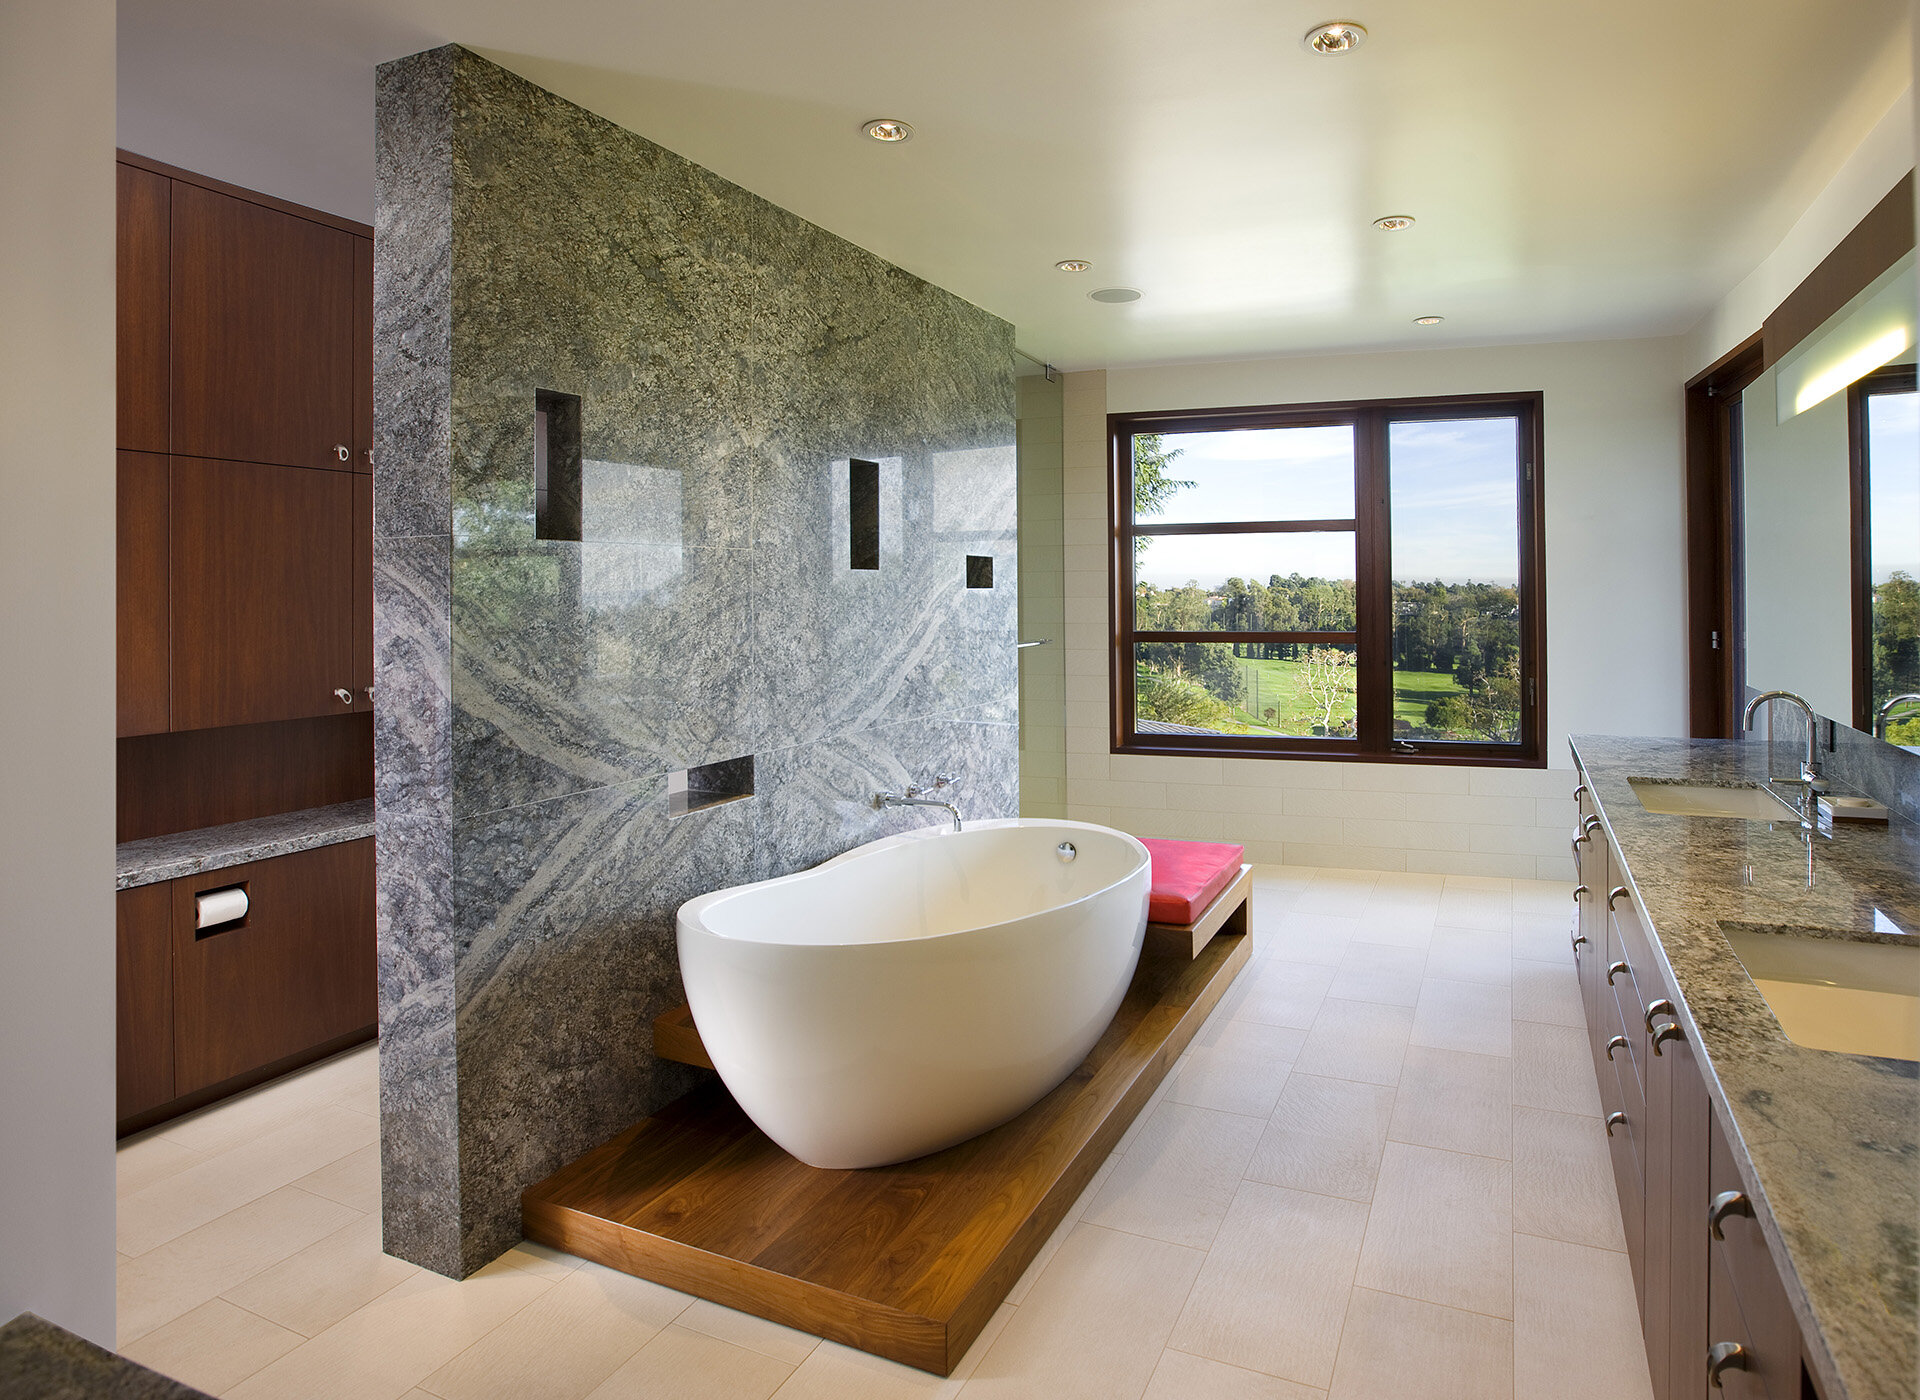  Contemporary general contractor built custom architectural home in the Pacific Palisades neighborhood of Los Angeles featuring master bathroom suite with marble and freestanding bathtub.  